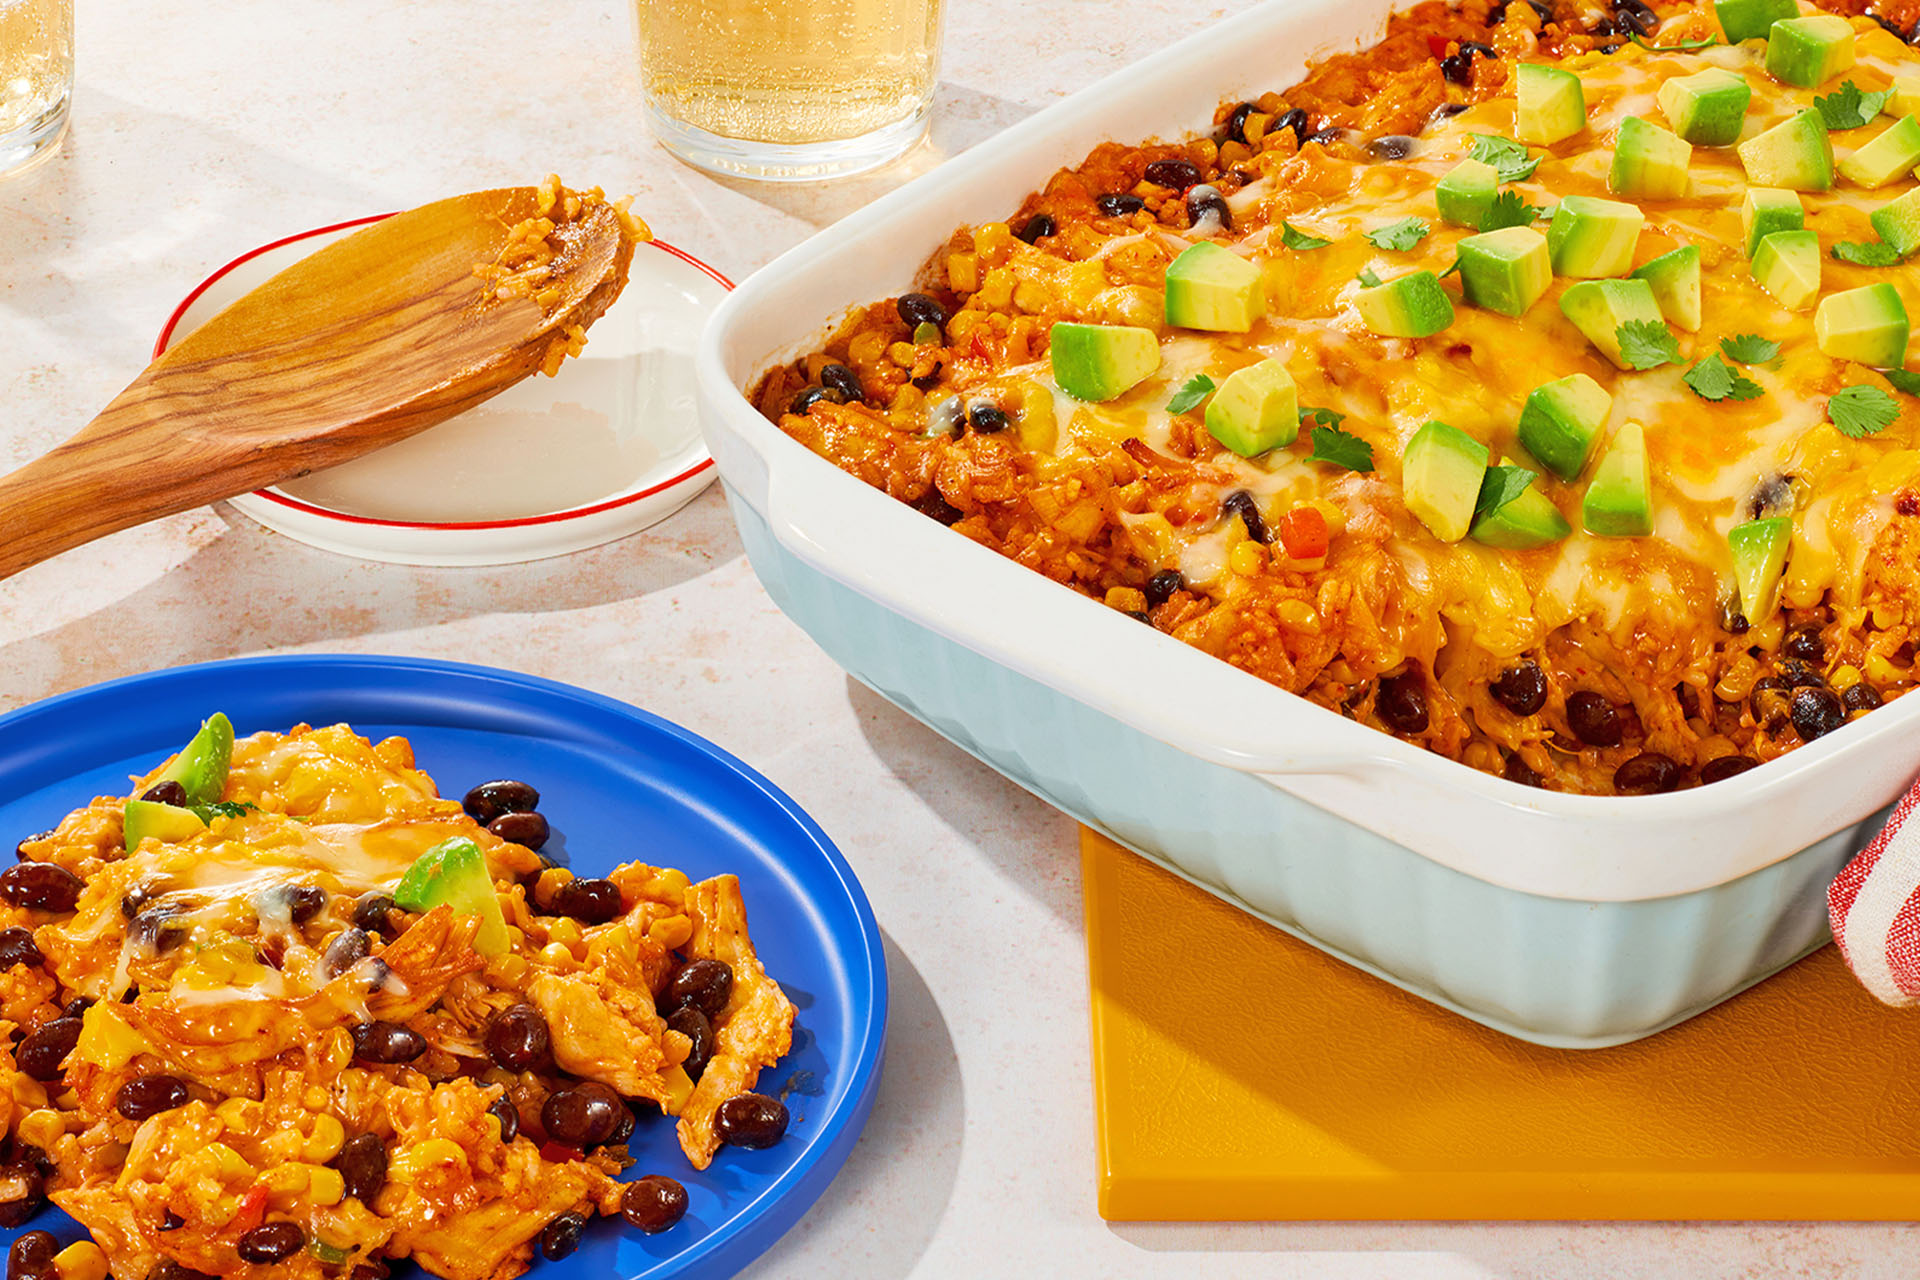 A baked casserole in a white dish topped with avocado and cheese. A serving is dished out on a blue plate.